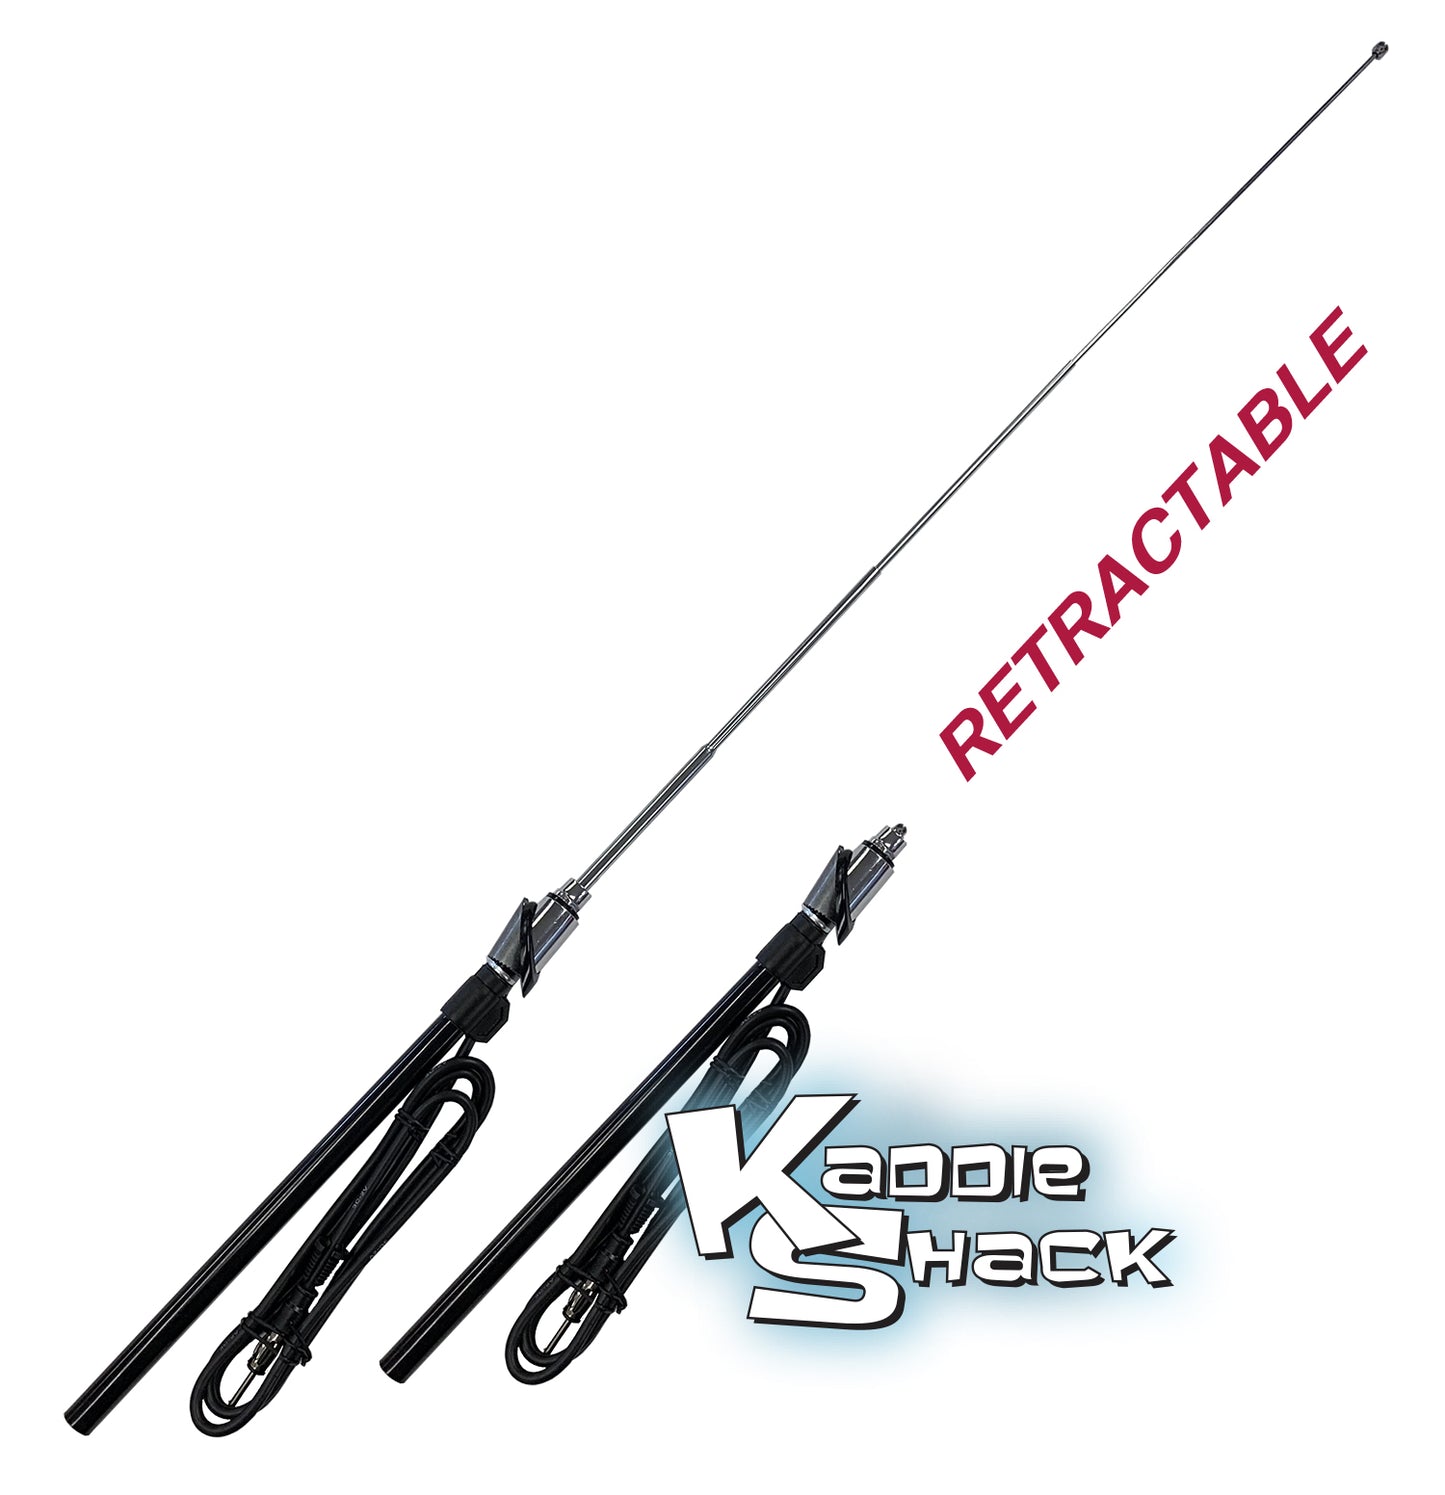 Retractable Radio Antenna, Fits Many Models w/ Angled Cowl Mount